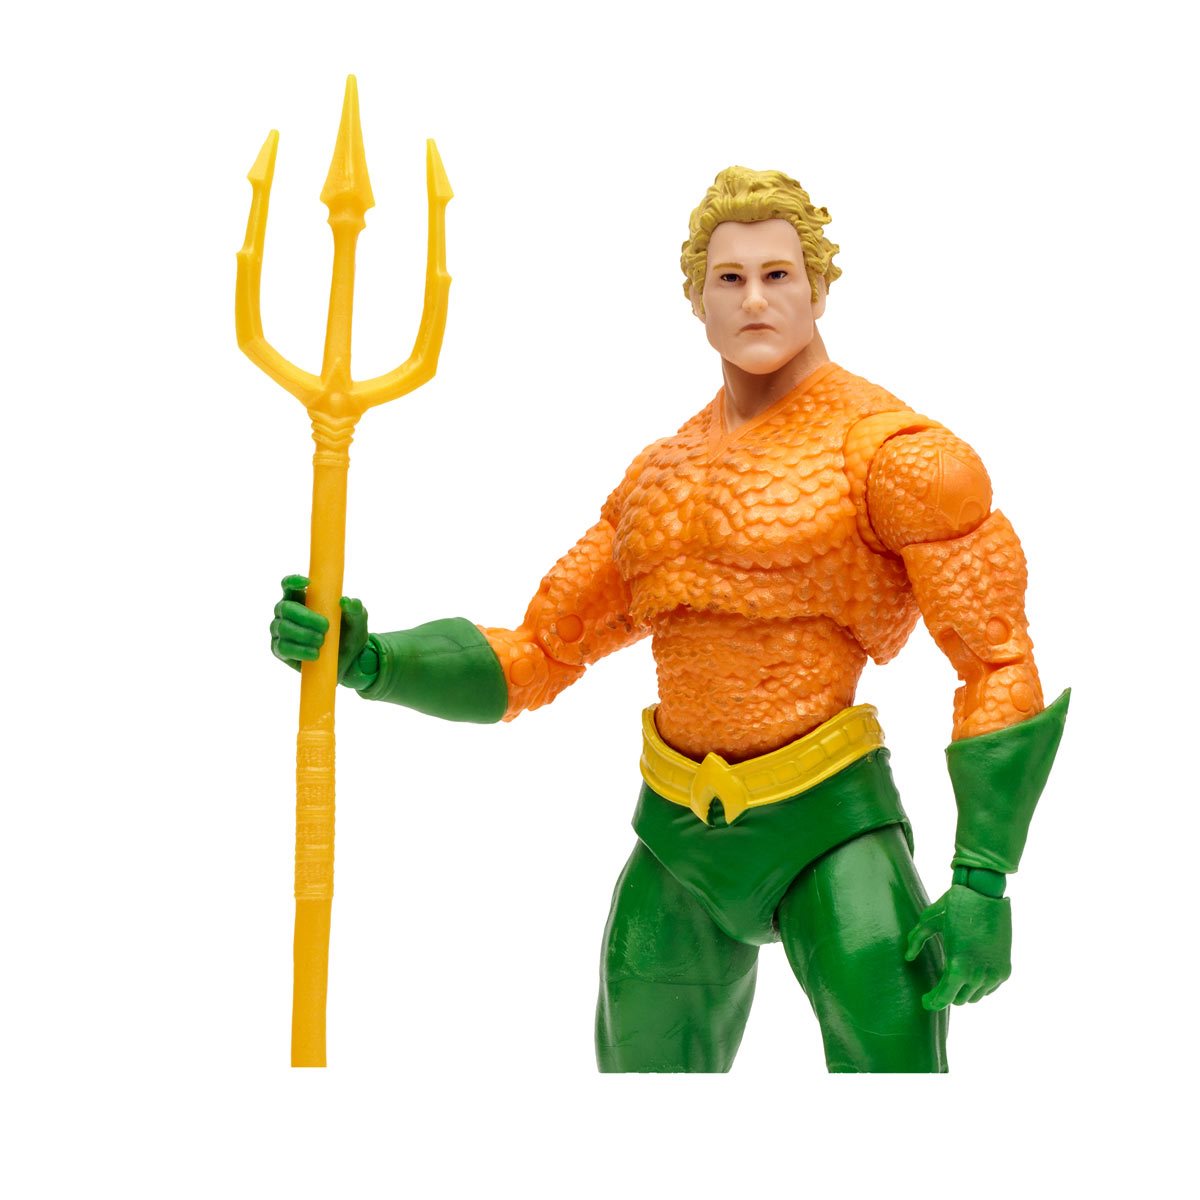 DC Direct Aquaman DC Classic 7-Inch Scale Wave 1 Action Figure with McFarlane Toys Digital Collectible